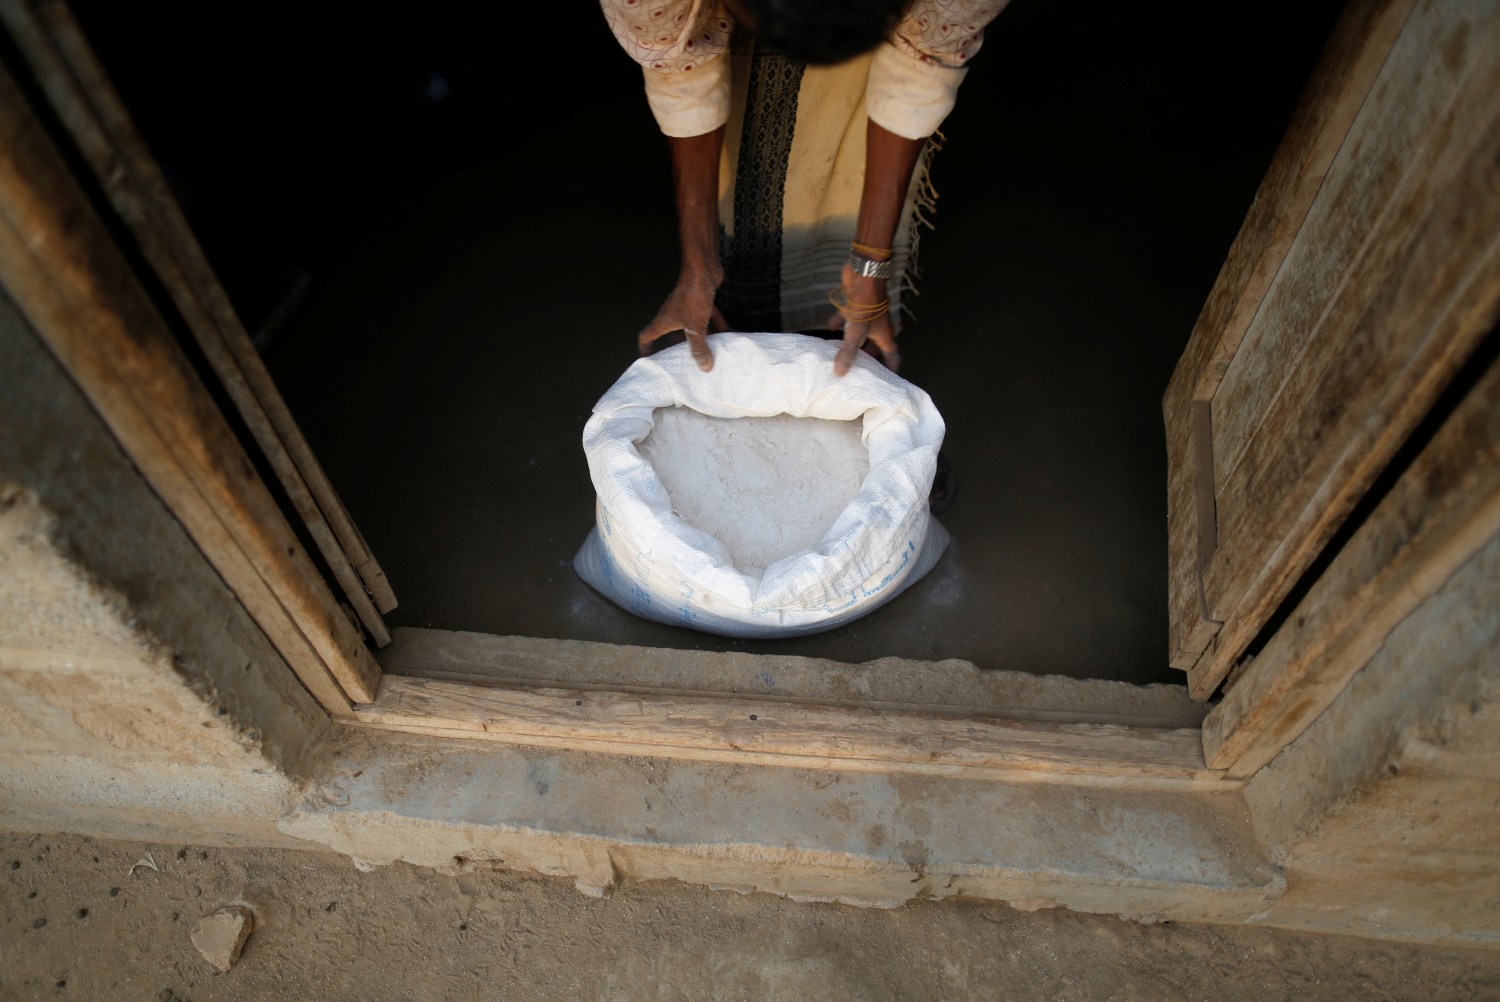 A man displays a sack of wheat flour at his home in the village of al-Jaraib in the northwestern province of Hajjah, Yemen, February 19, 2019. REUTERS/Khaled Abdullah   SEARCH "YEMEN HUNGER" FOR THIS STORY. SEARCH "WIDER IMAGE" FOR ALL STORIES. - RC1D5D6EA590